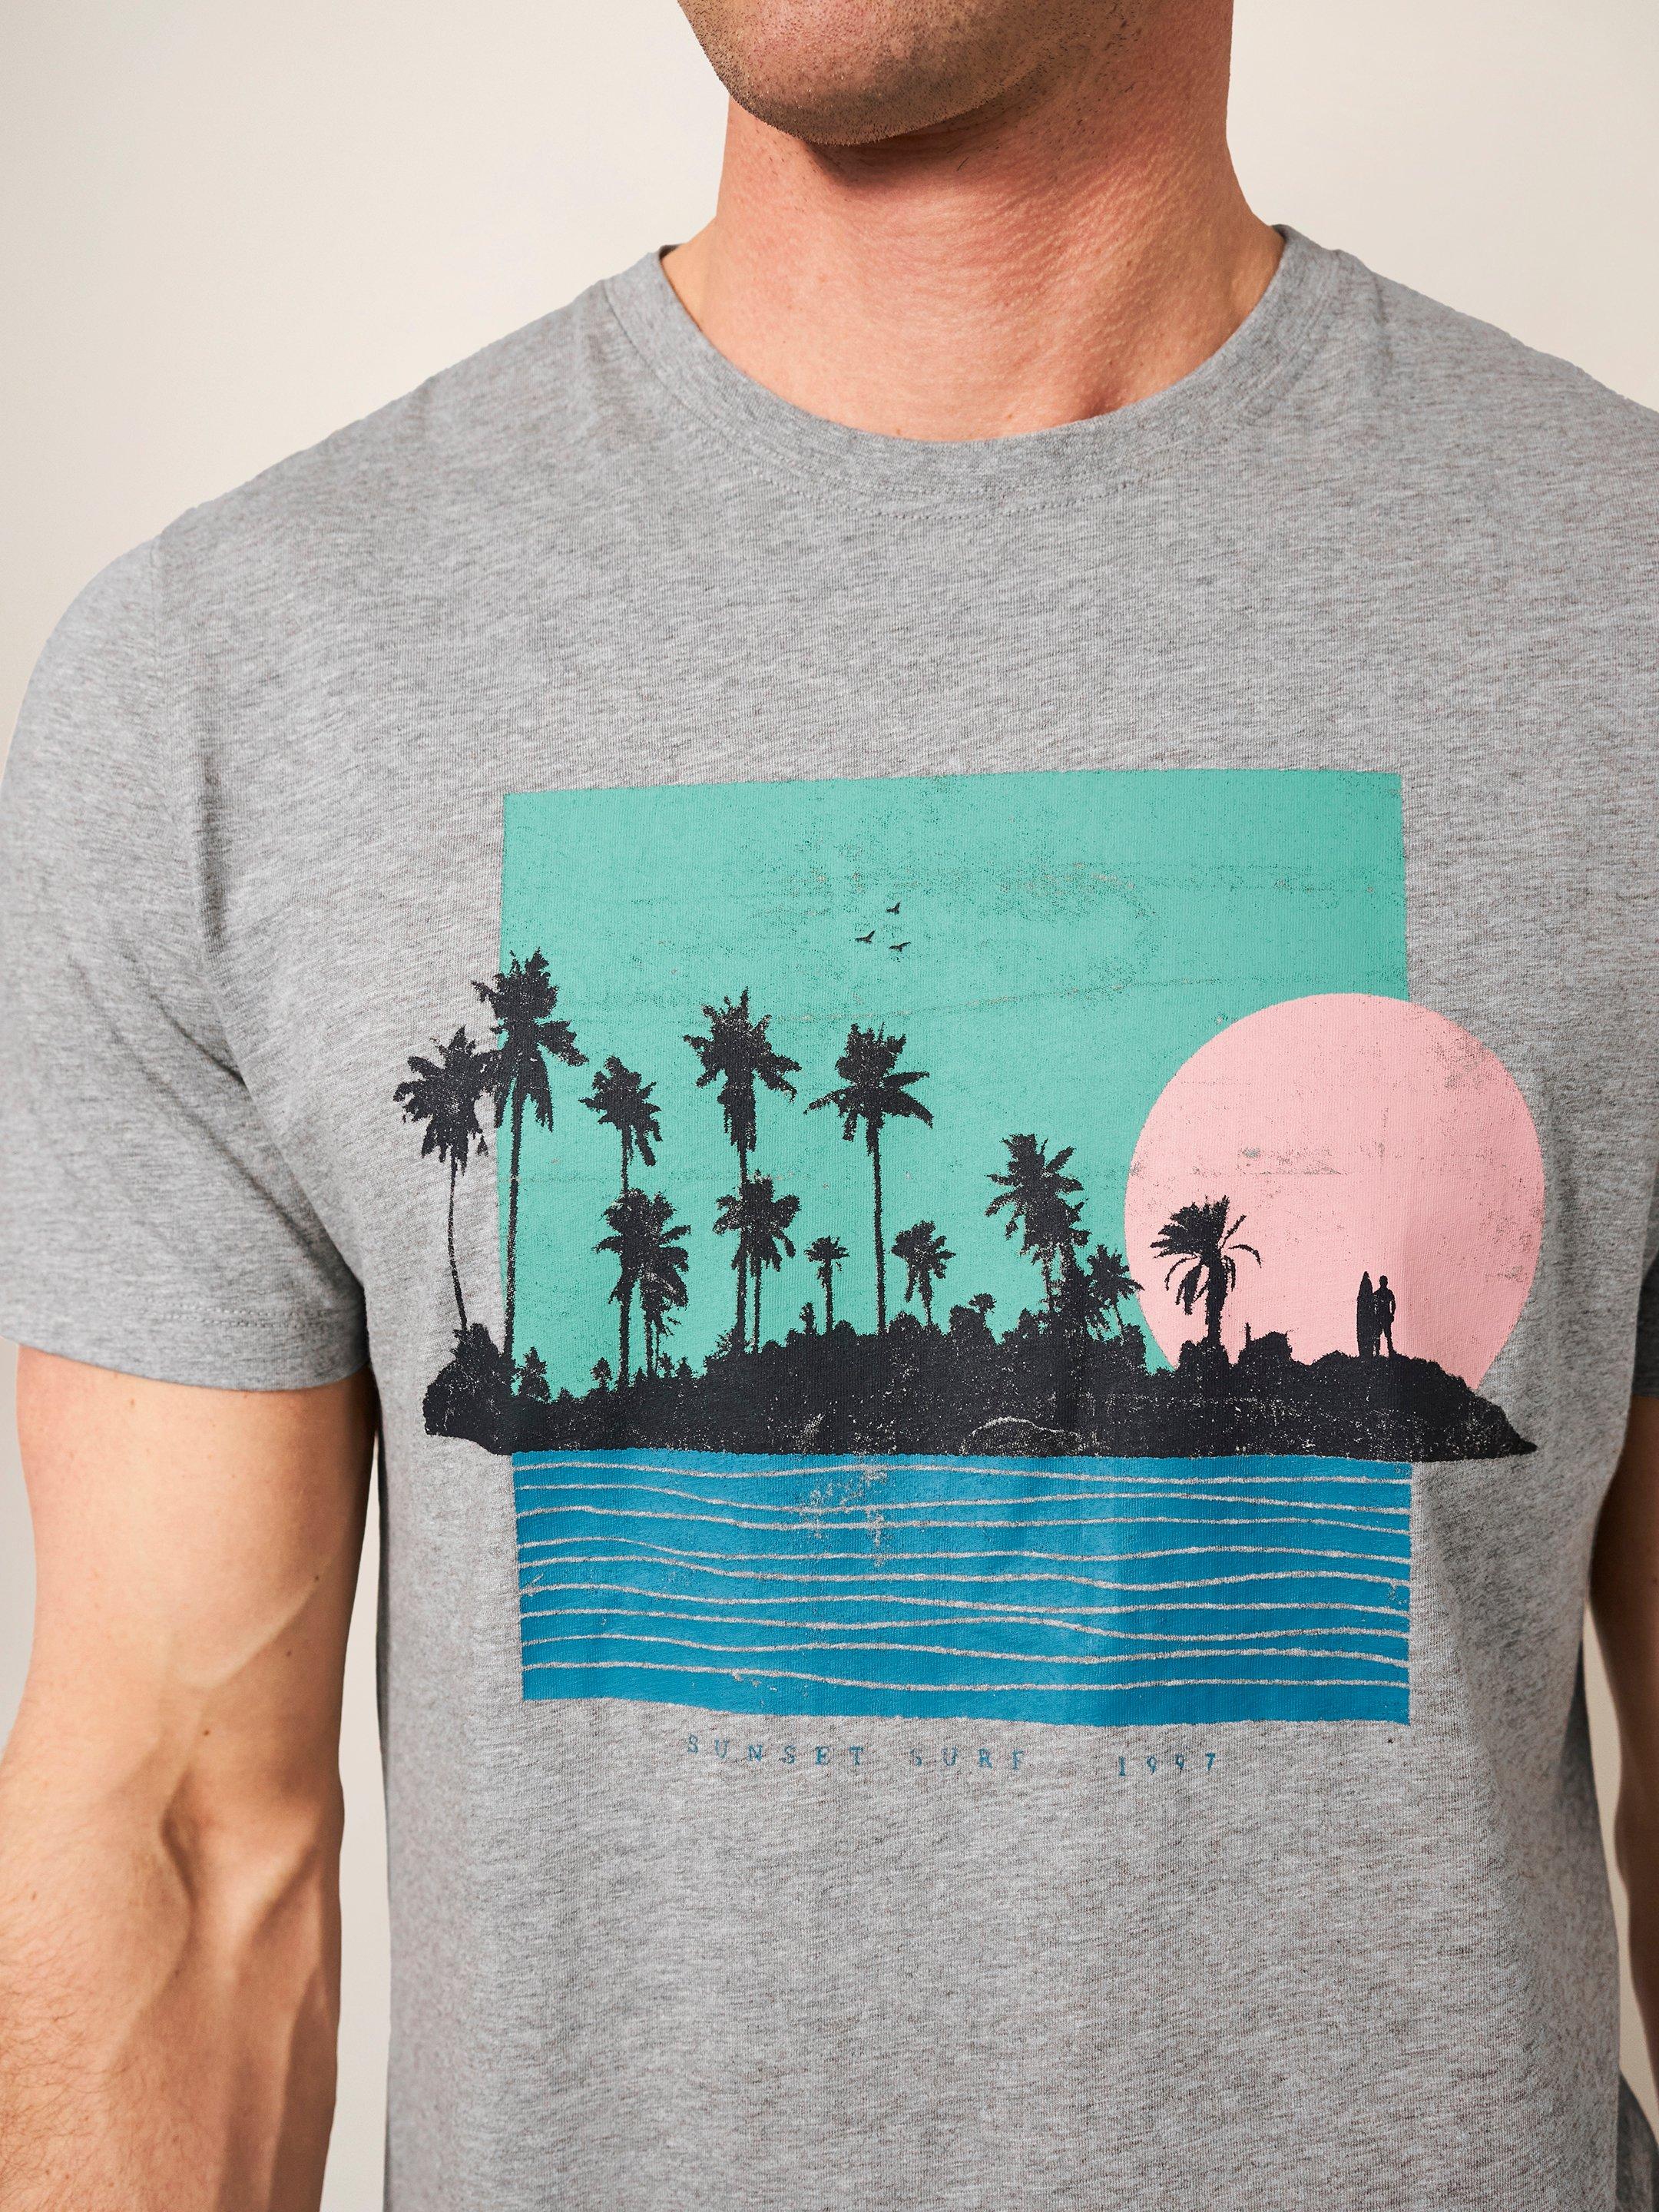 Sunset Surf Graphic Tee in GREY MARL - MODEL DETAIL